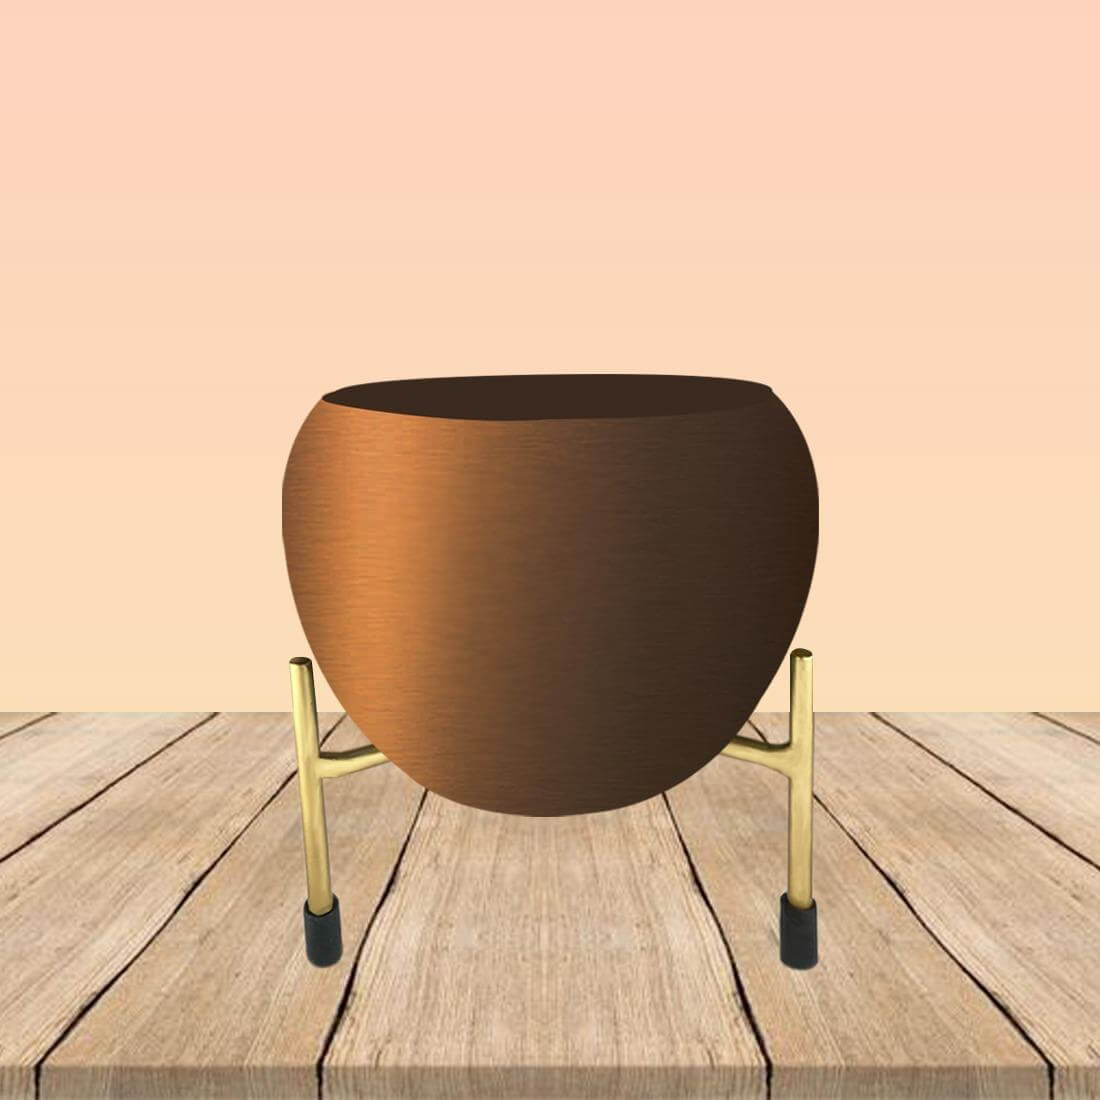 APPLE DESIGN FLOWER POT BROWN WITH STAND